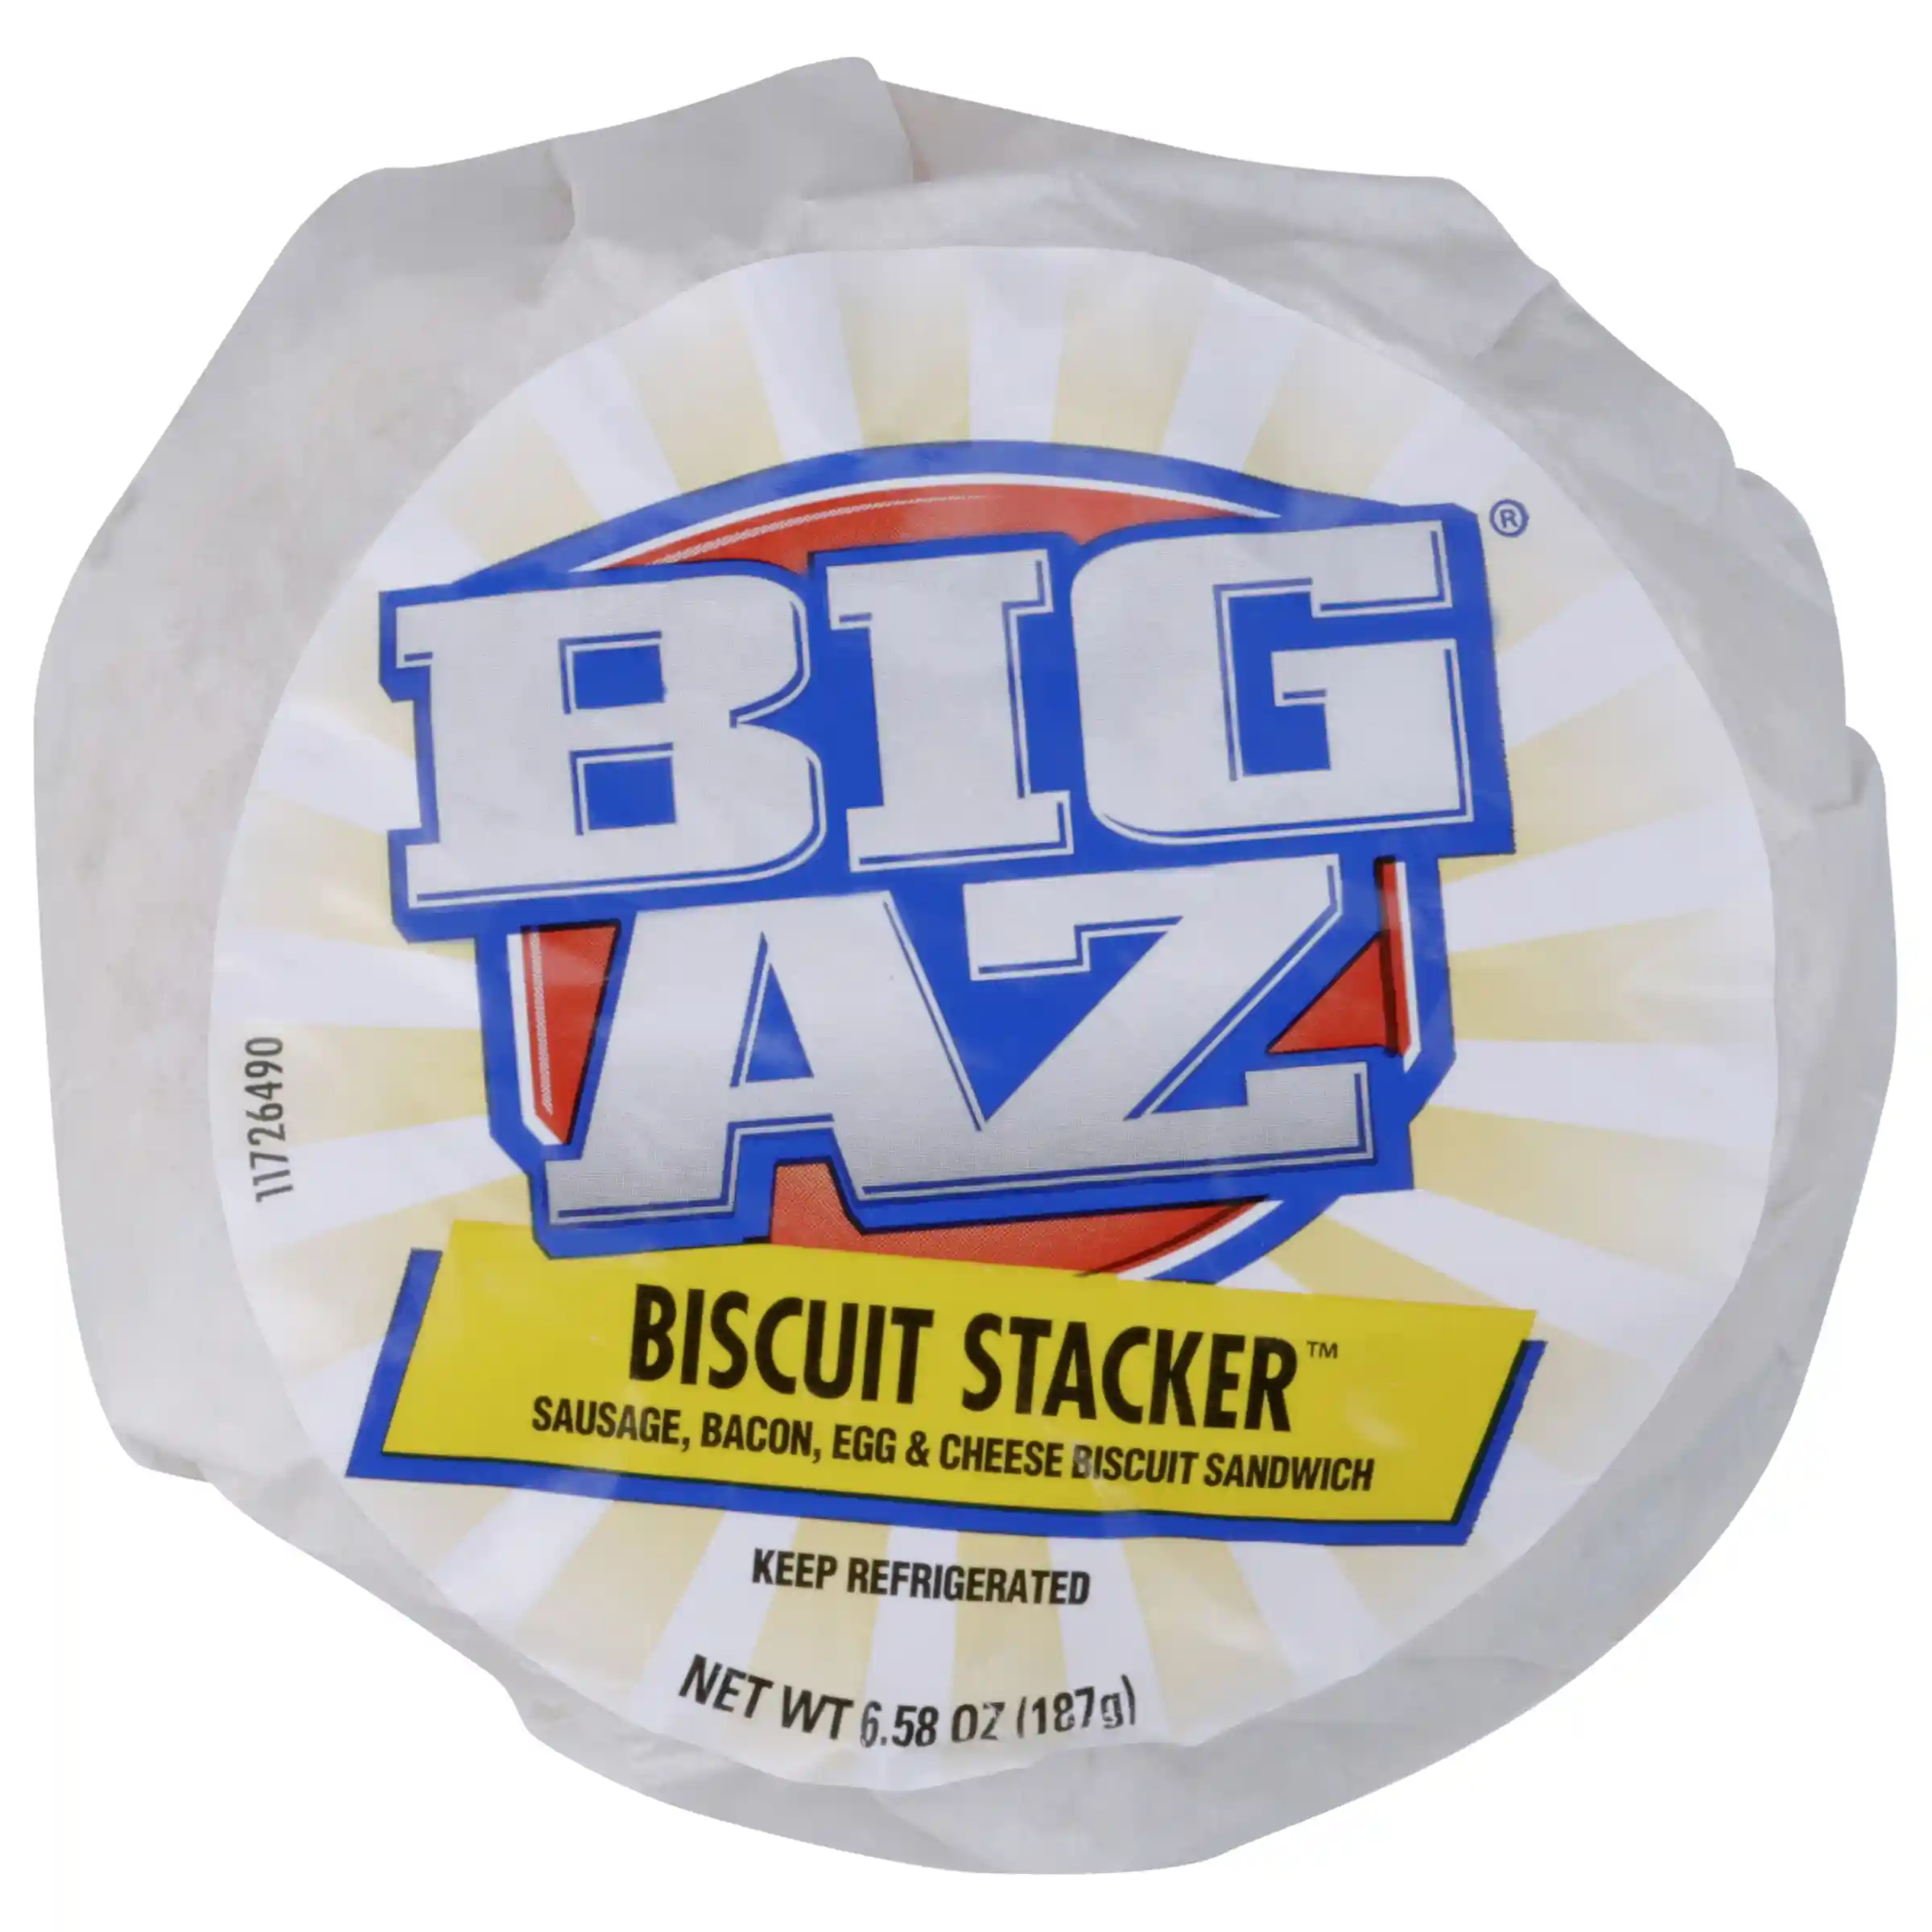 BIG AZ® Biscuit Stacker® Sausage, Bacon, Egg And Cheese Biscuit Sandwich_image_11